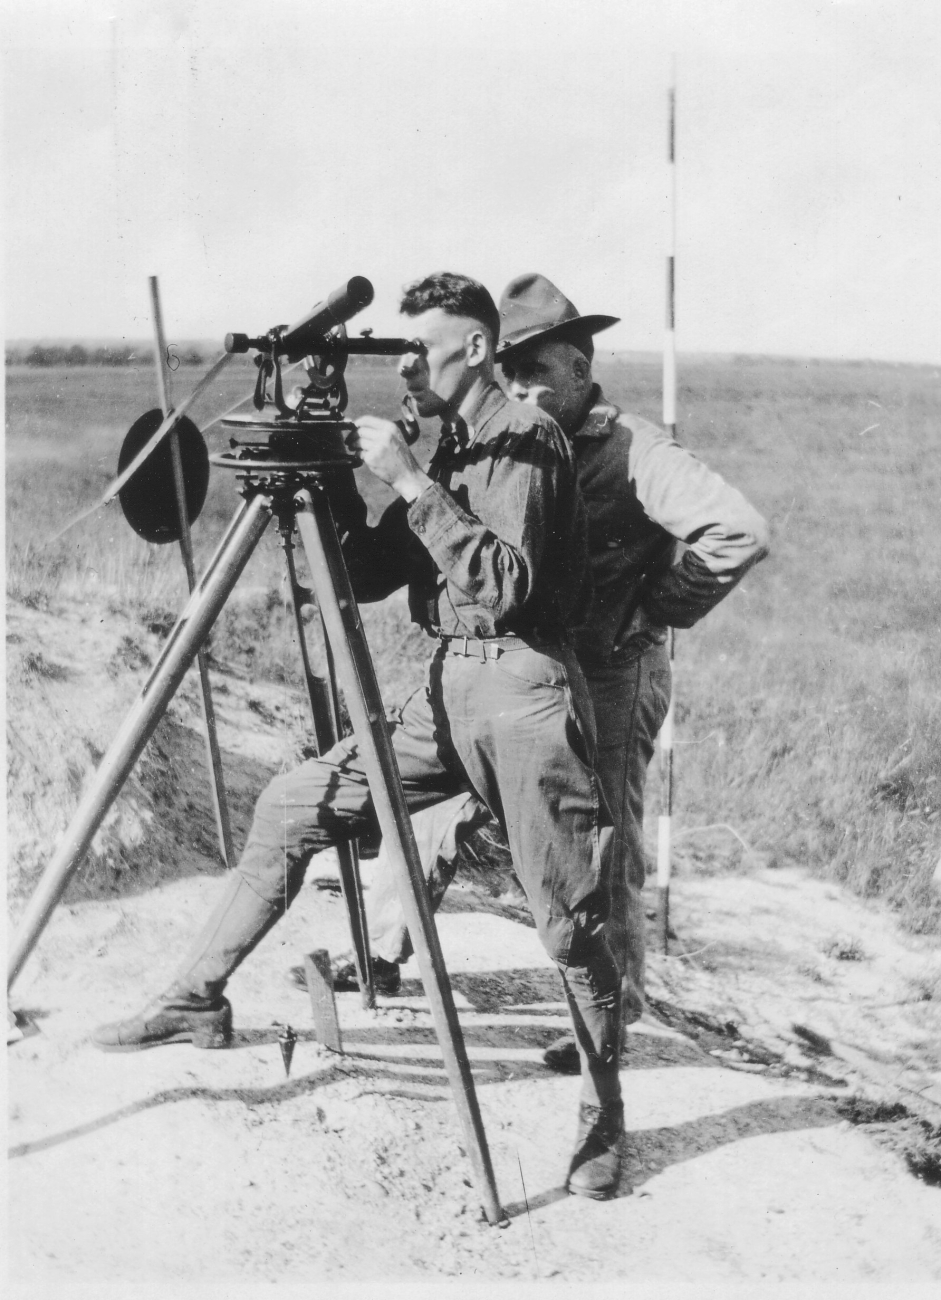 Signal Corps meteorological students Keyte and Arnold practicingusing theodolite to observe weather balloon azimuth and angular altitude